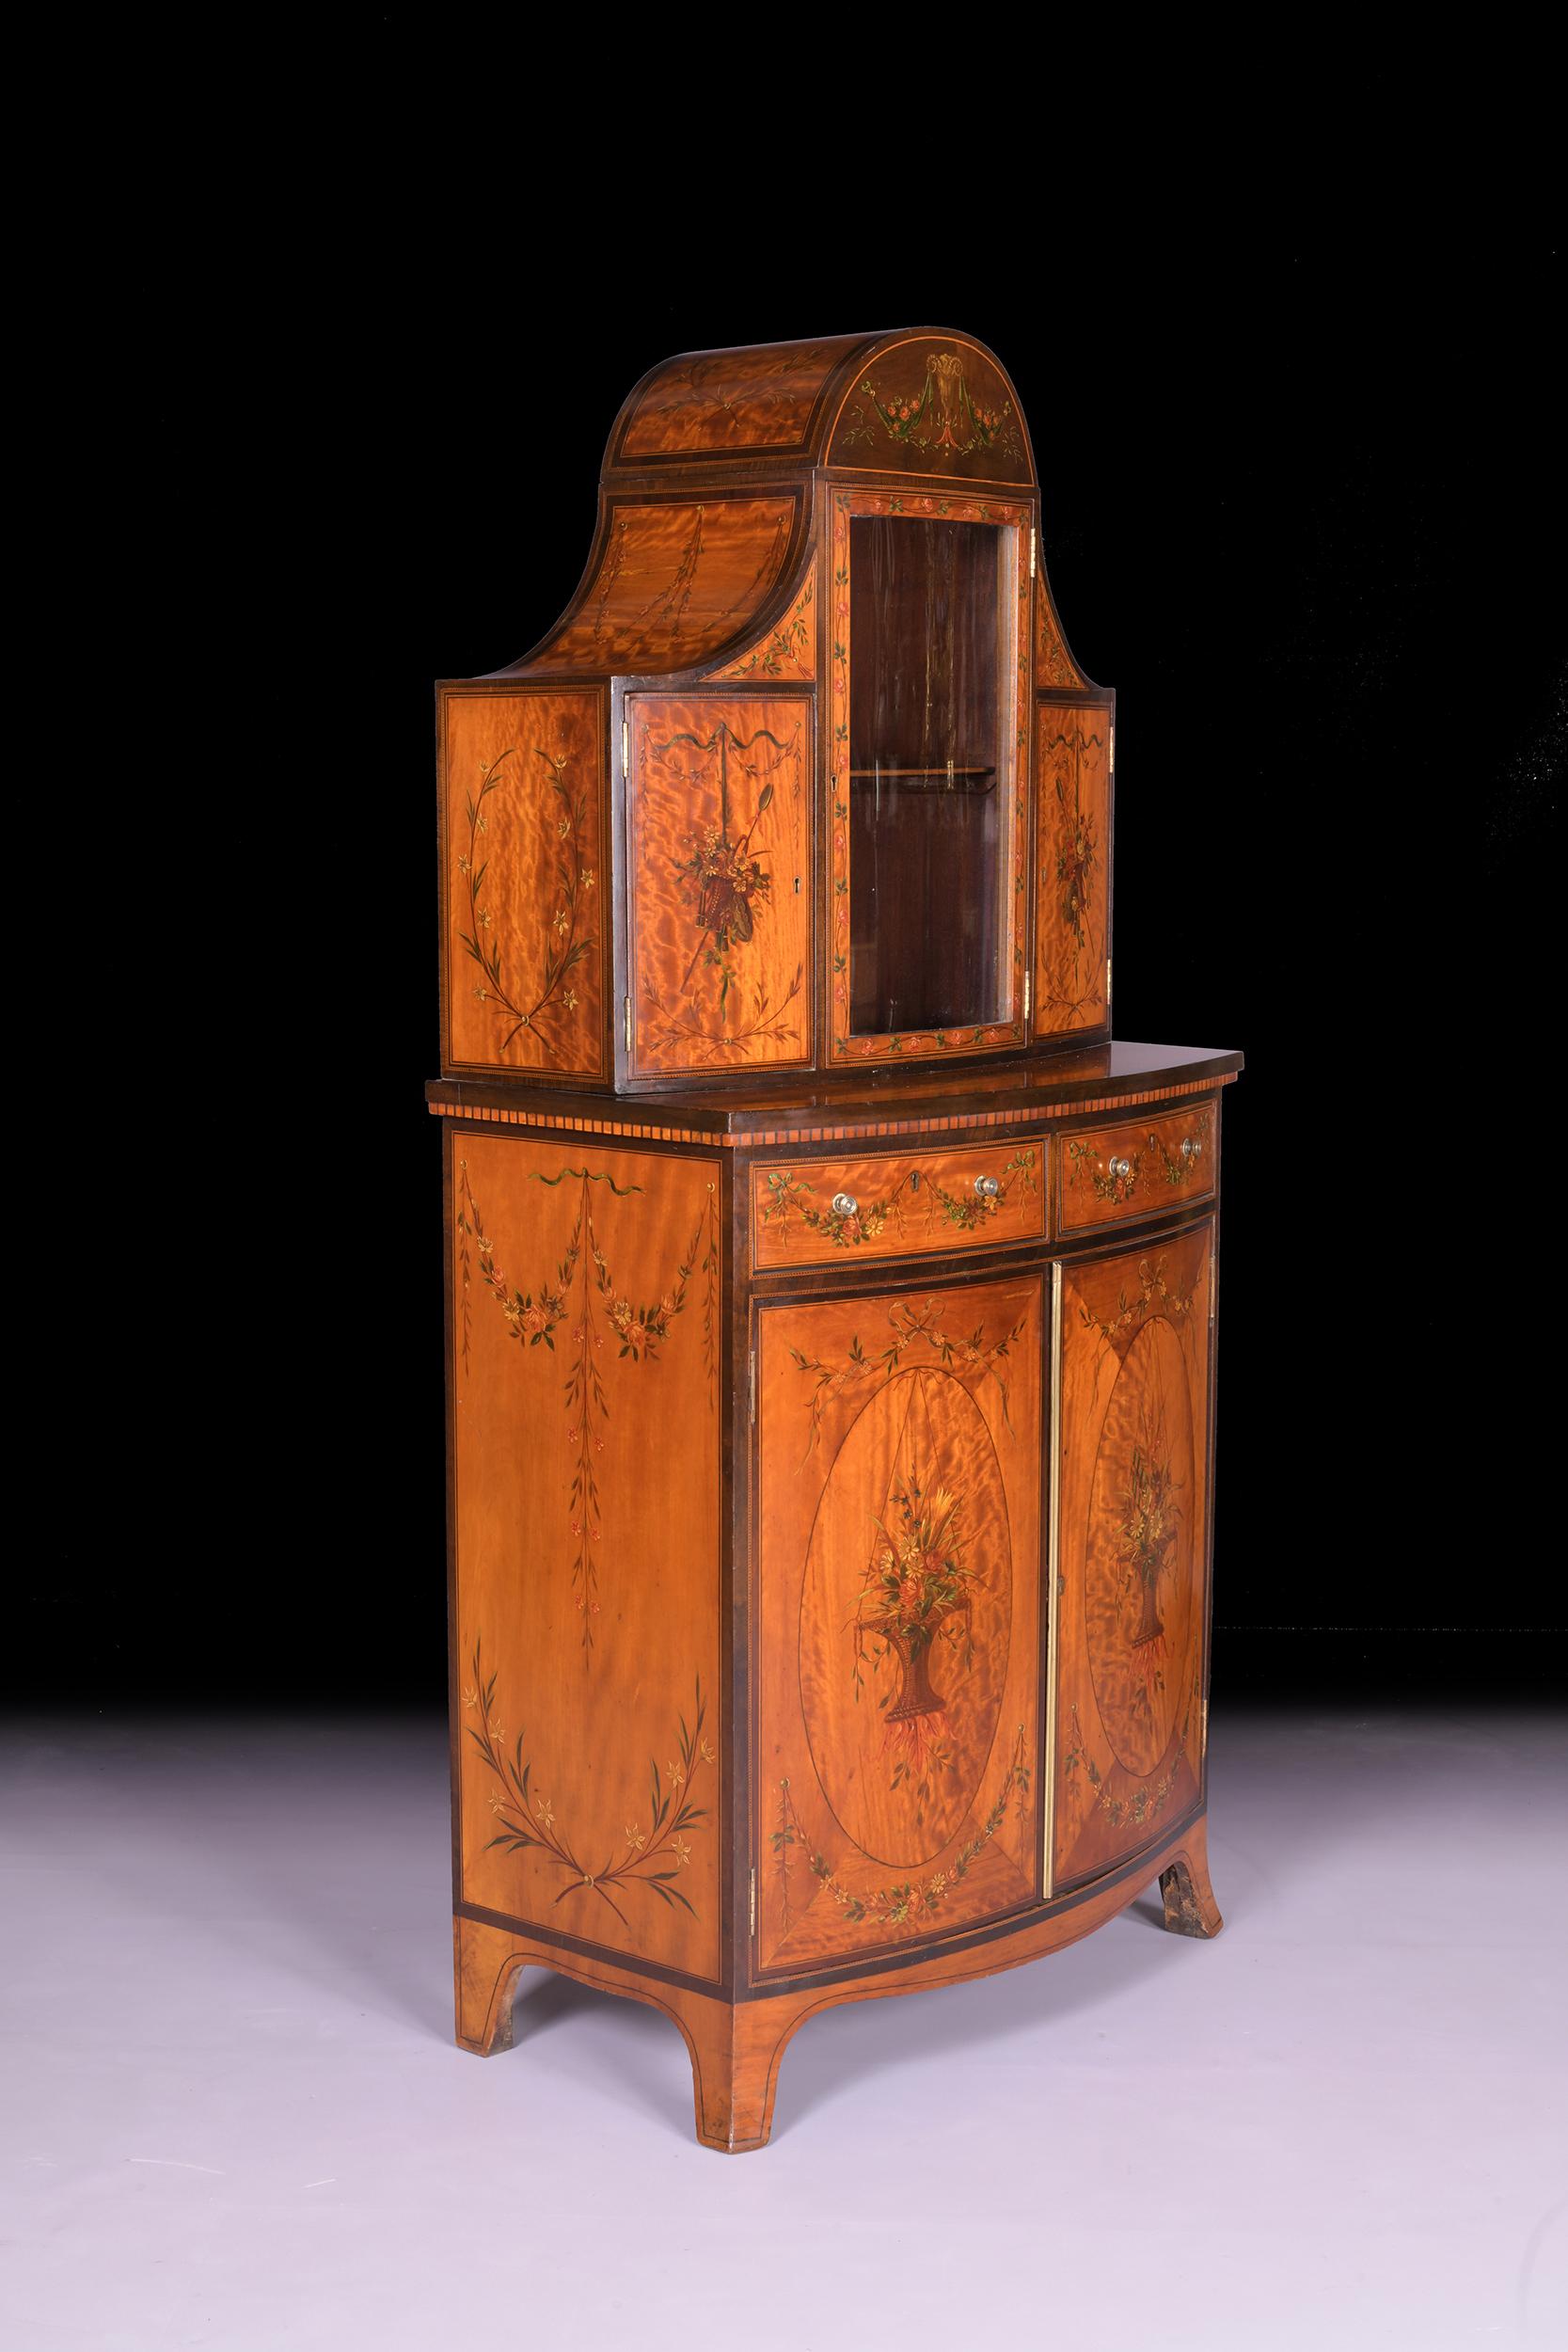 A very fine George III satinwood and hand painted side cabinet, the superstructure with central mirror backed arch display case, flanked by painted panelled doors on either side. The projecting with two frieze drawers above 2 bow shaped painted